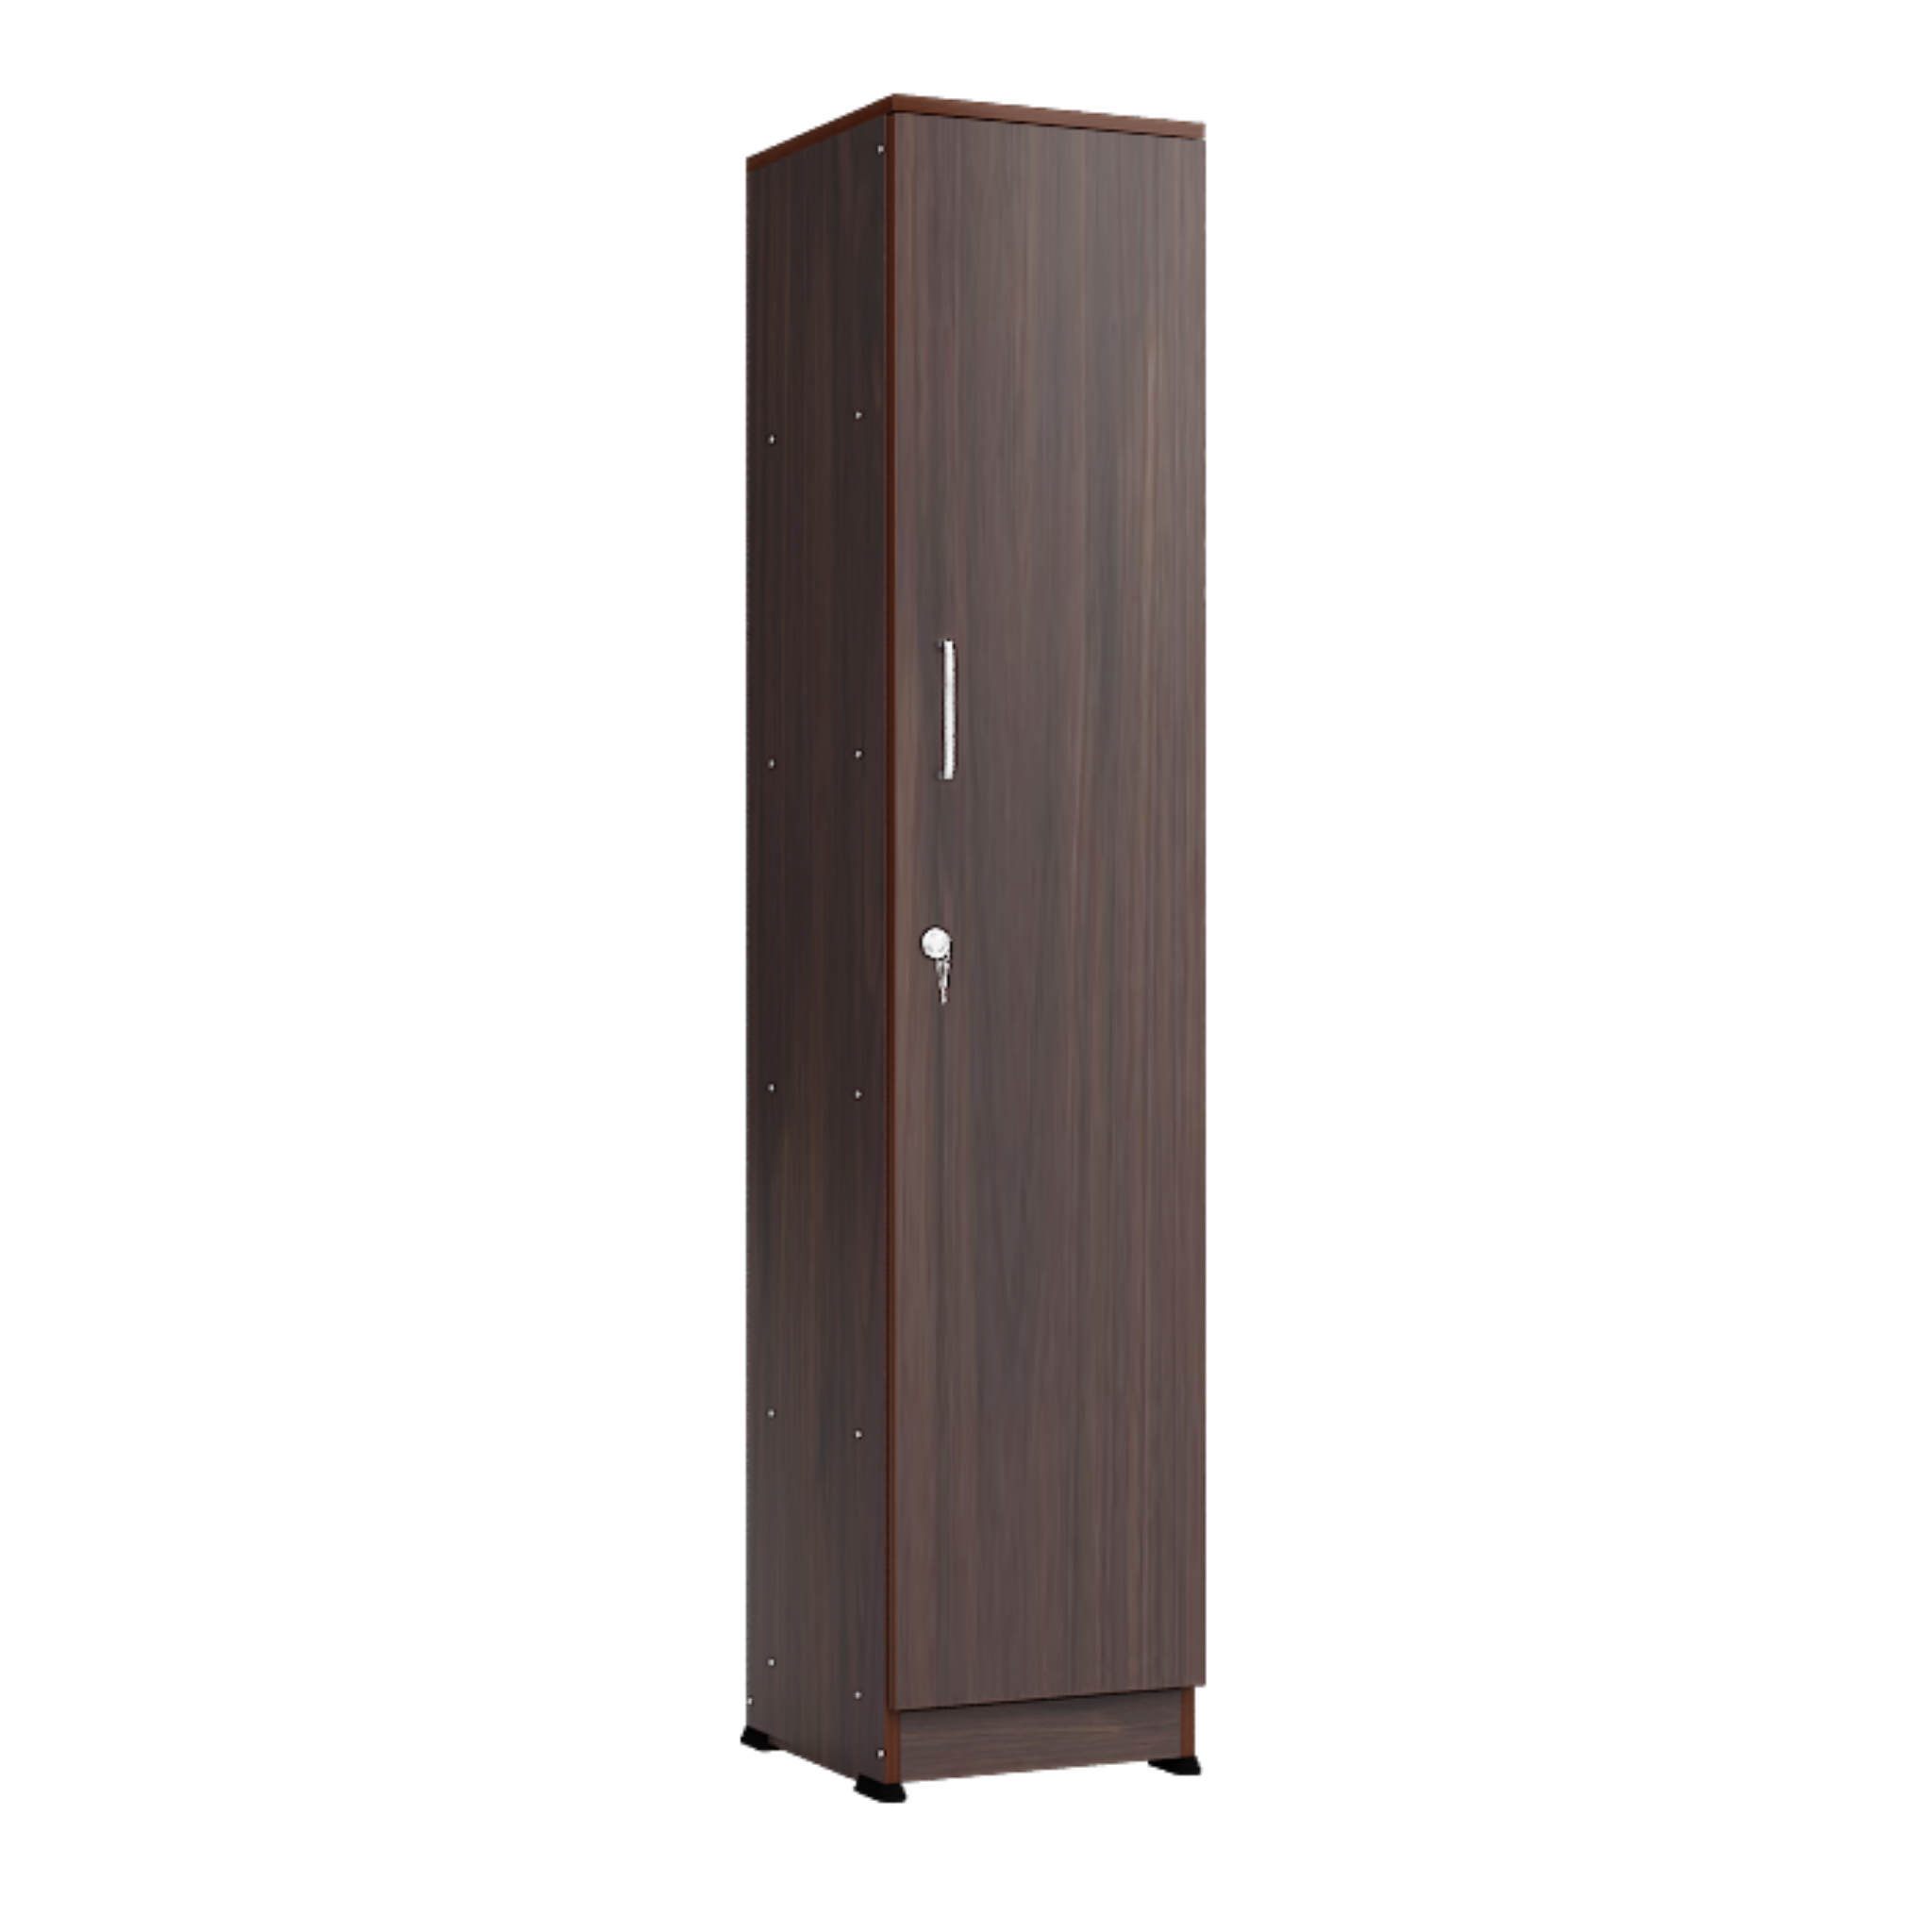 Single Door Cabinet for Office Use